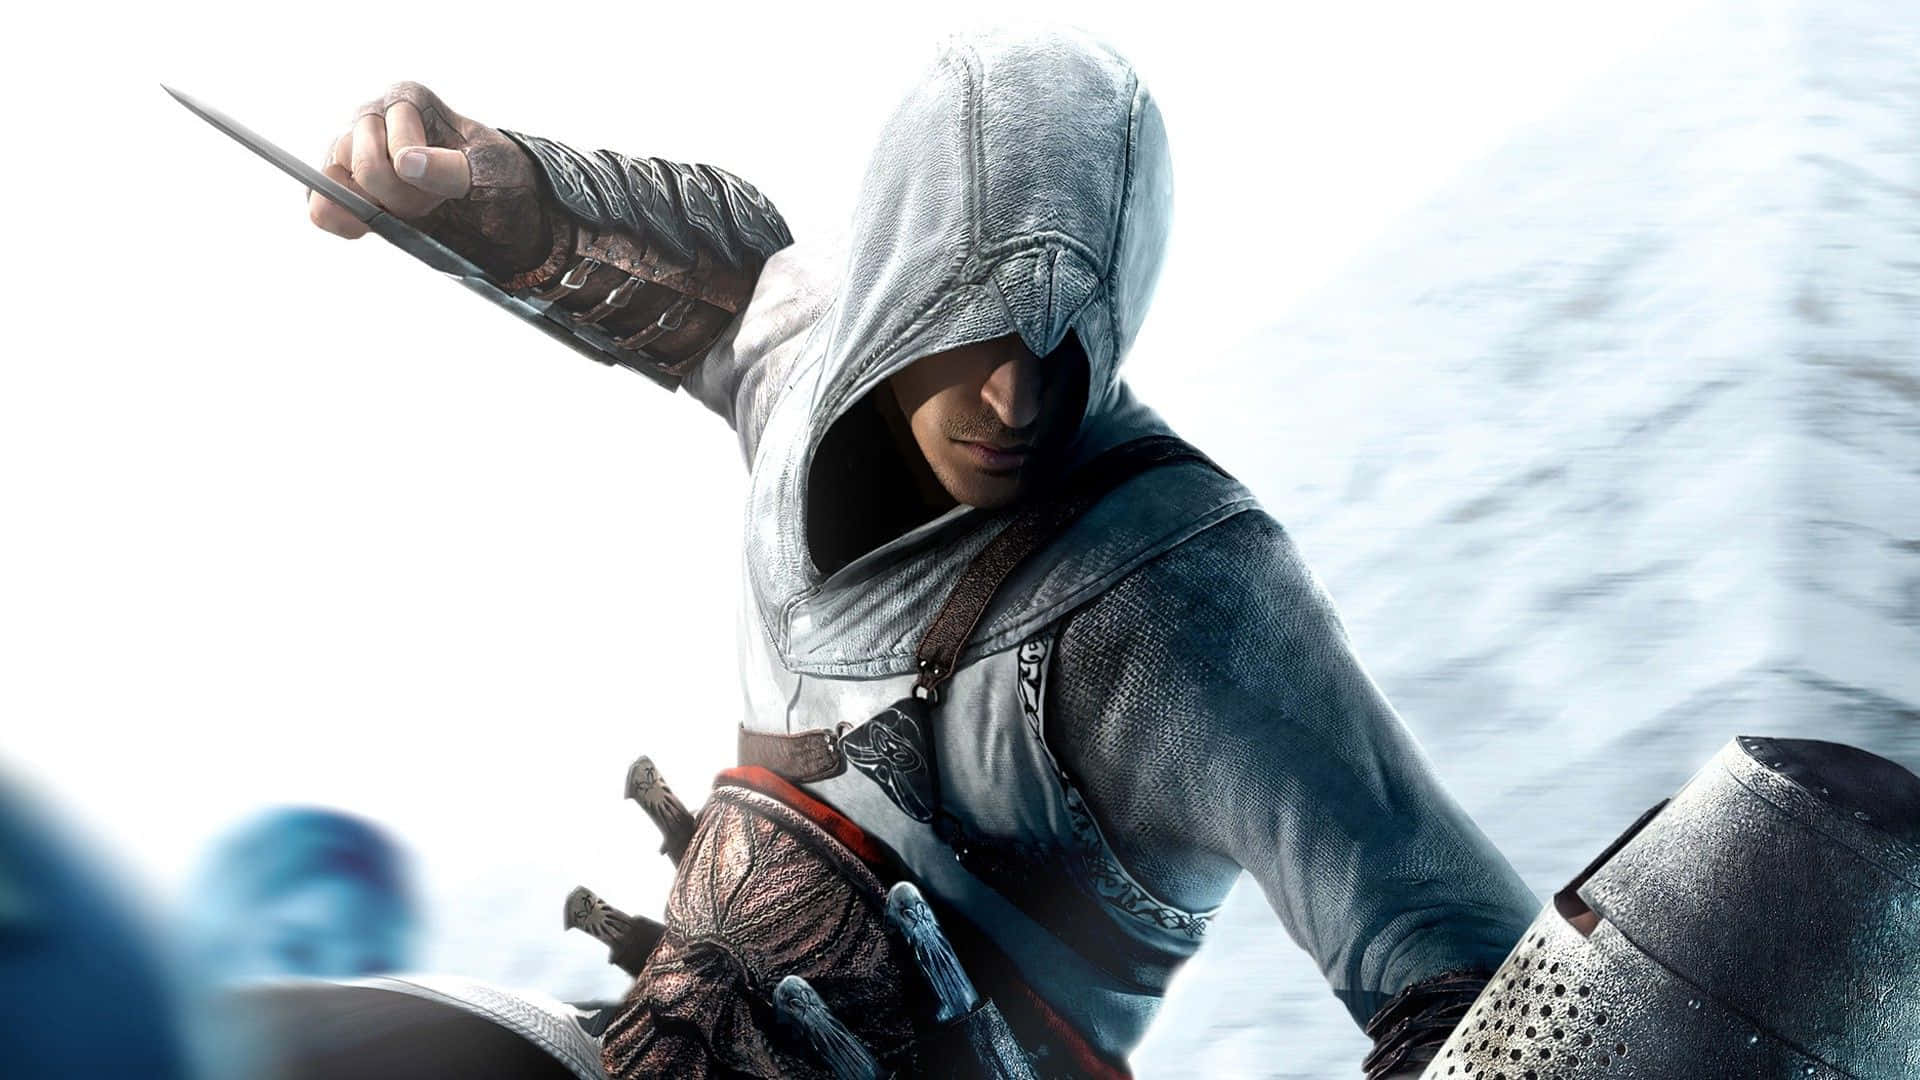 Download Assassin's Creed Altair in Action Wallpaper